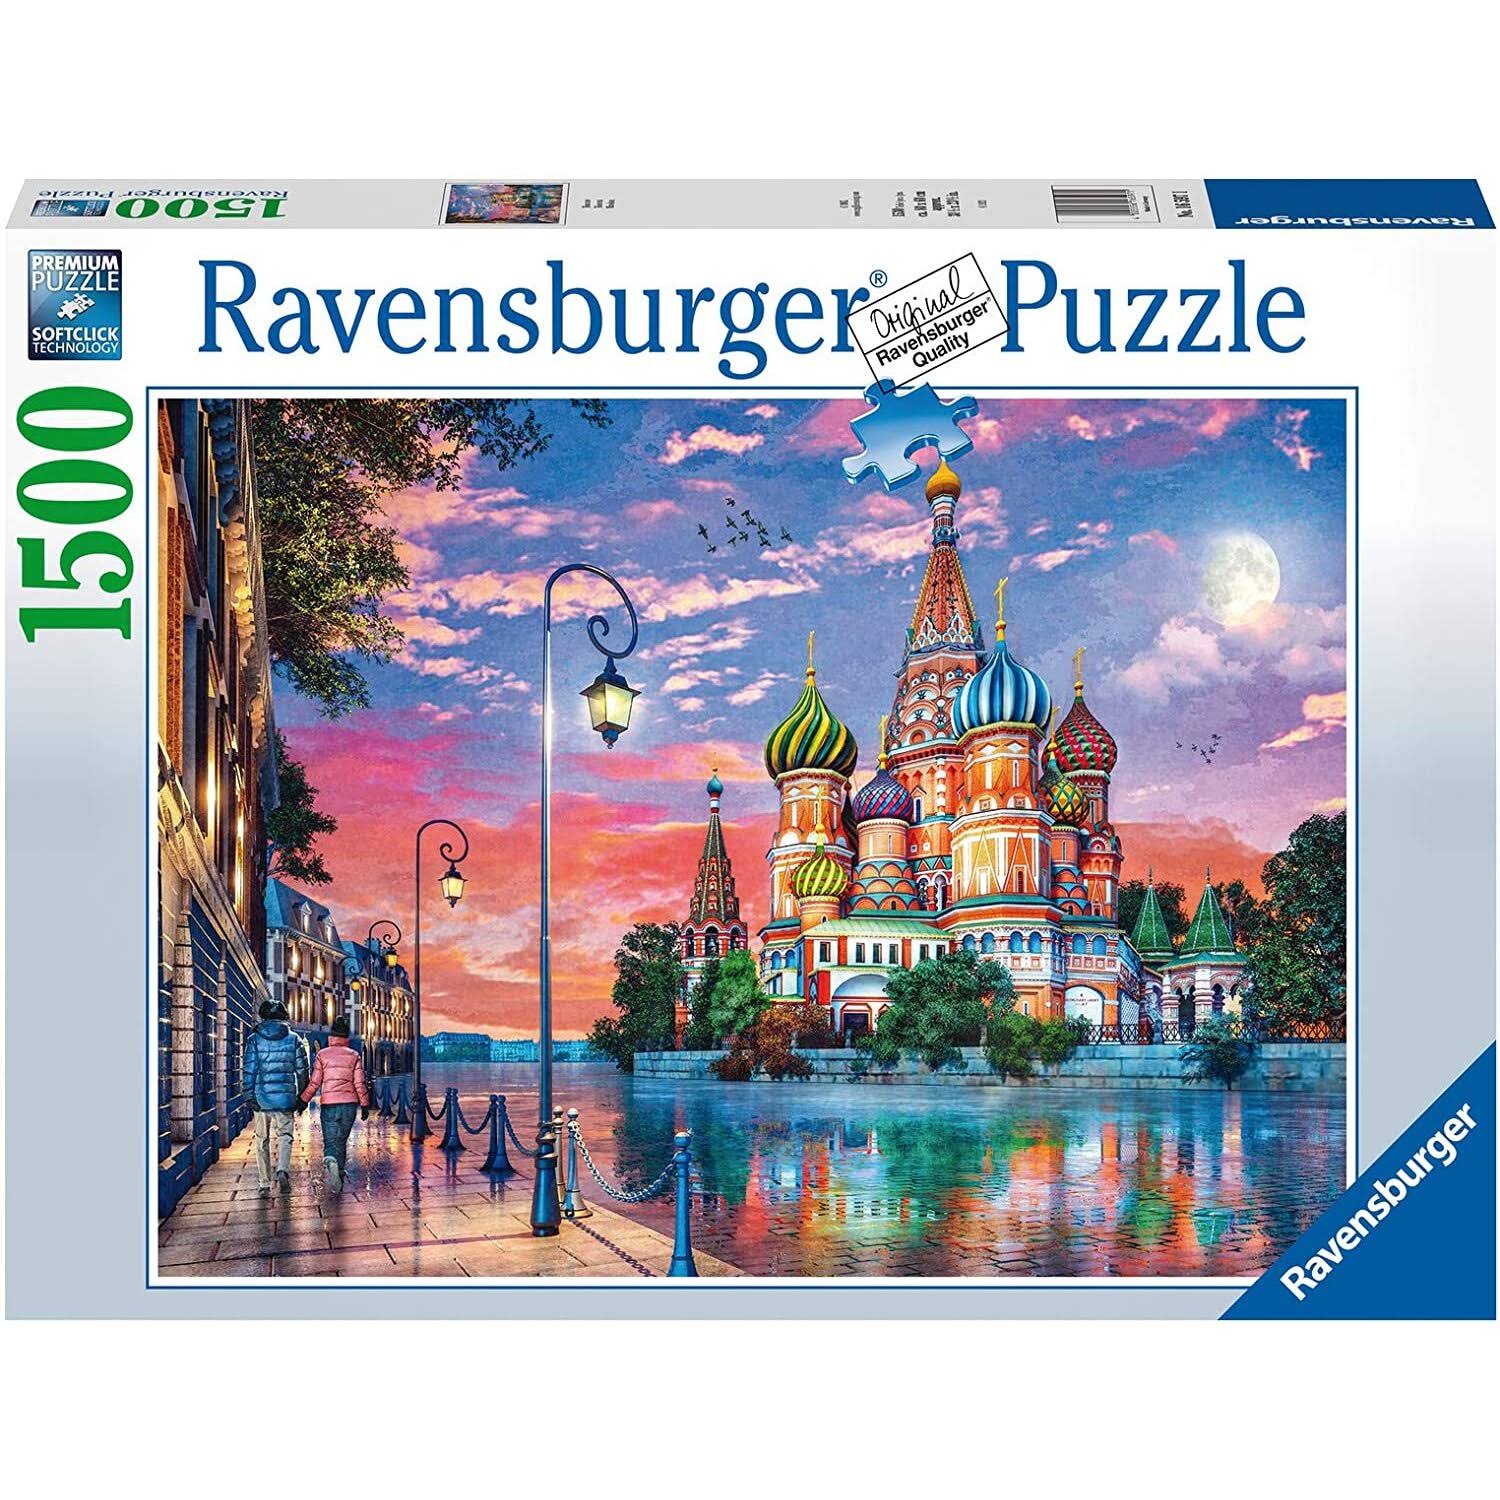 Ravensburger Moscow Jigsaw Puzzle (1500 Pieces)